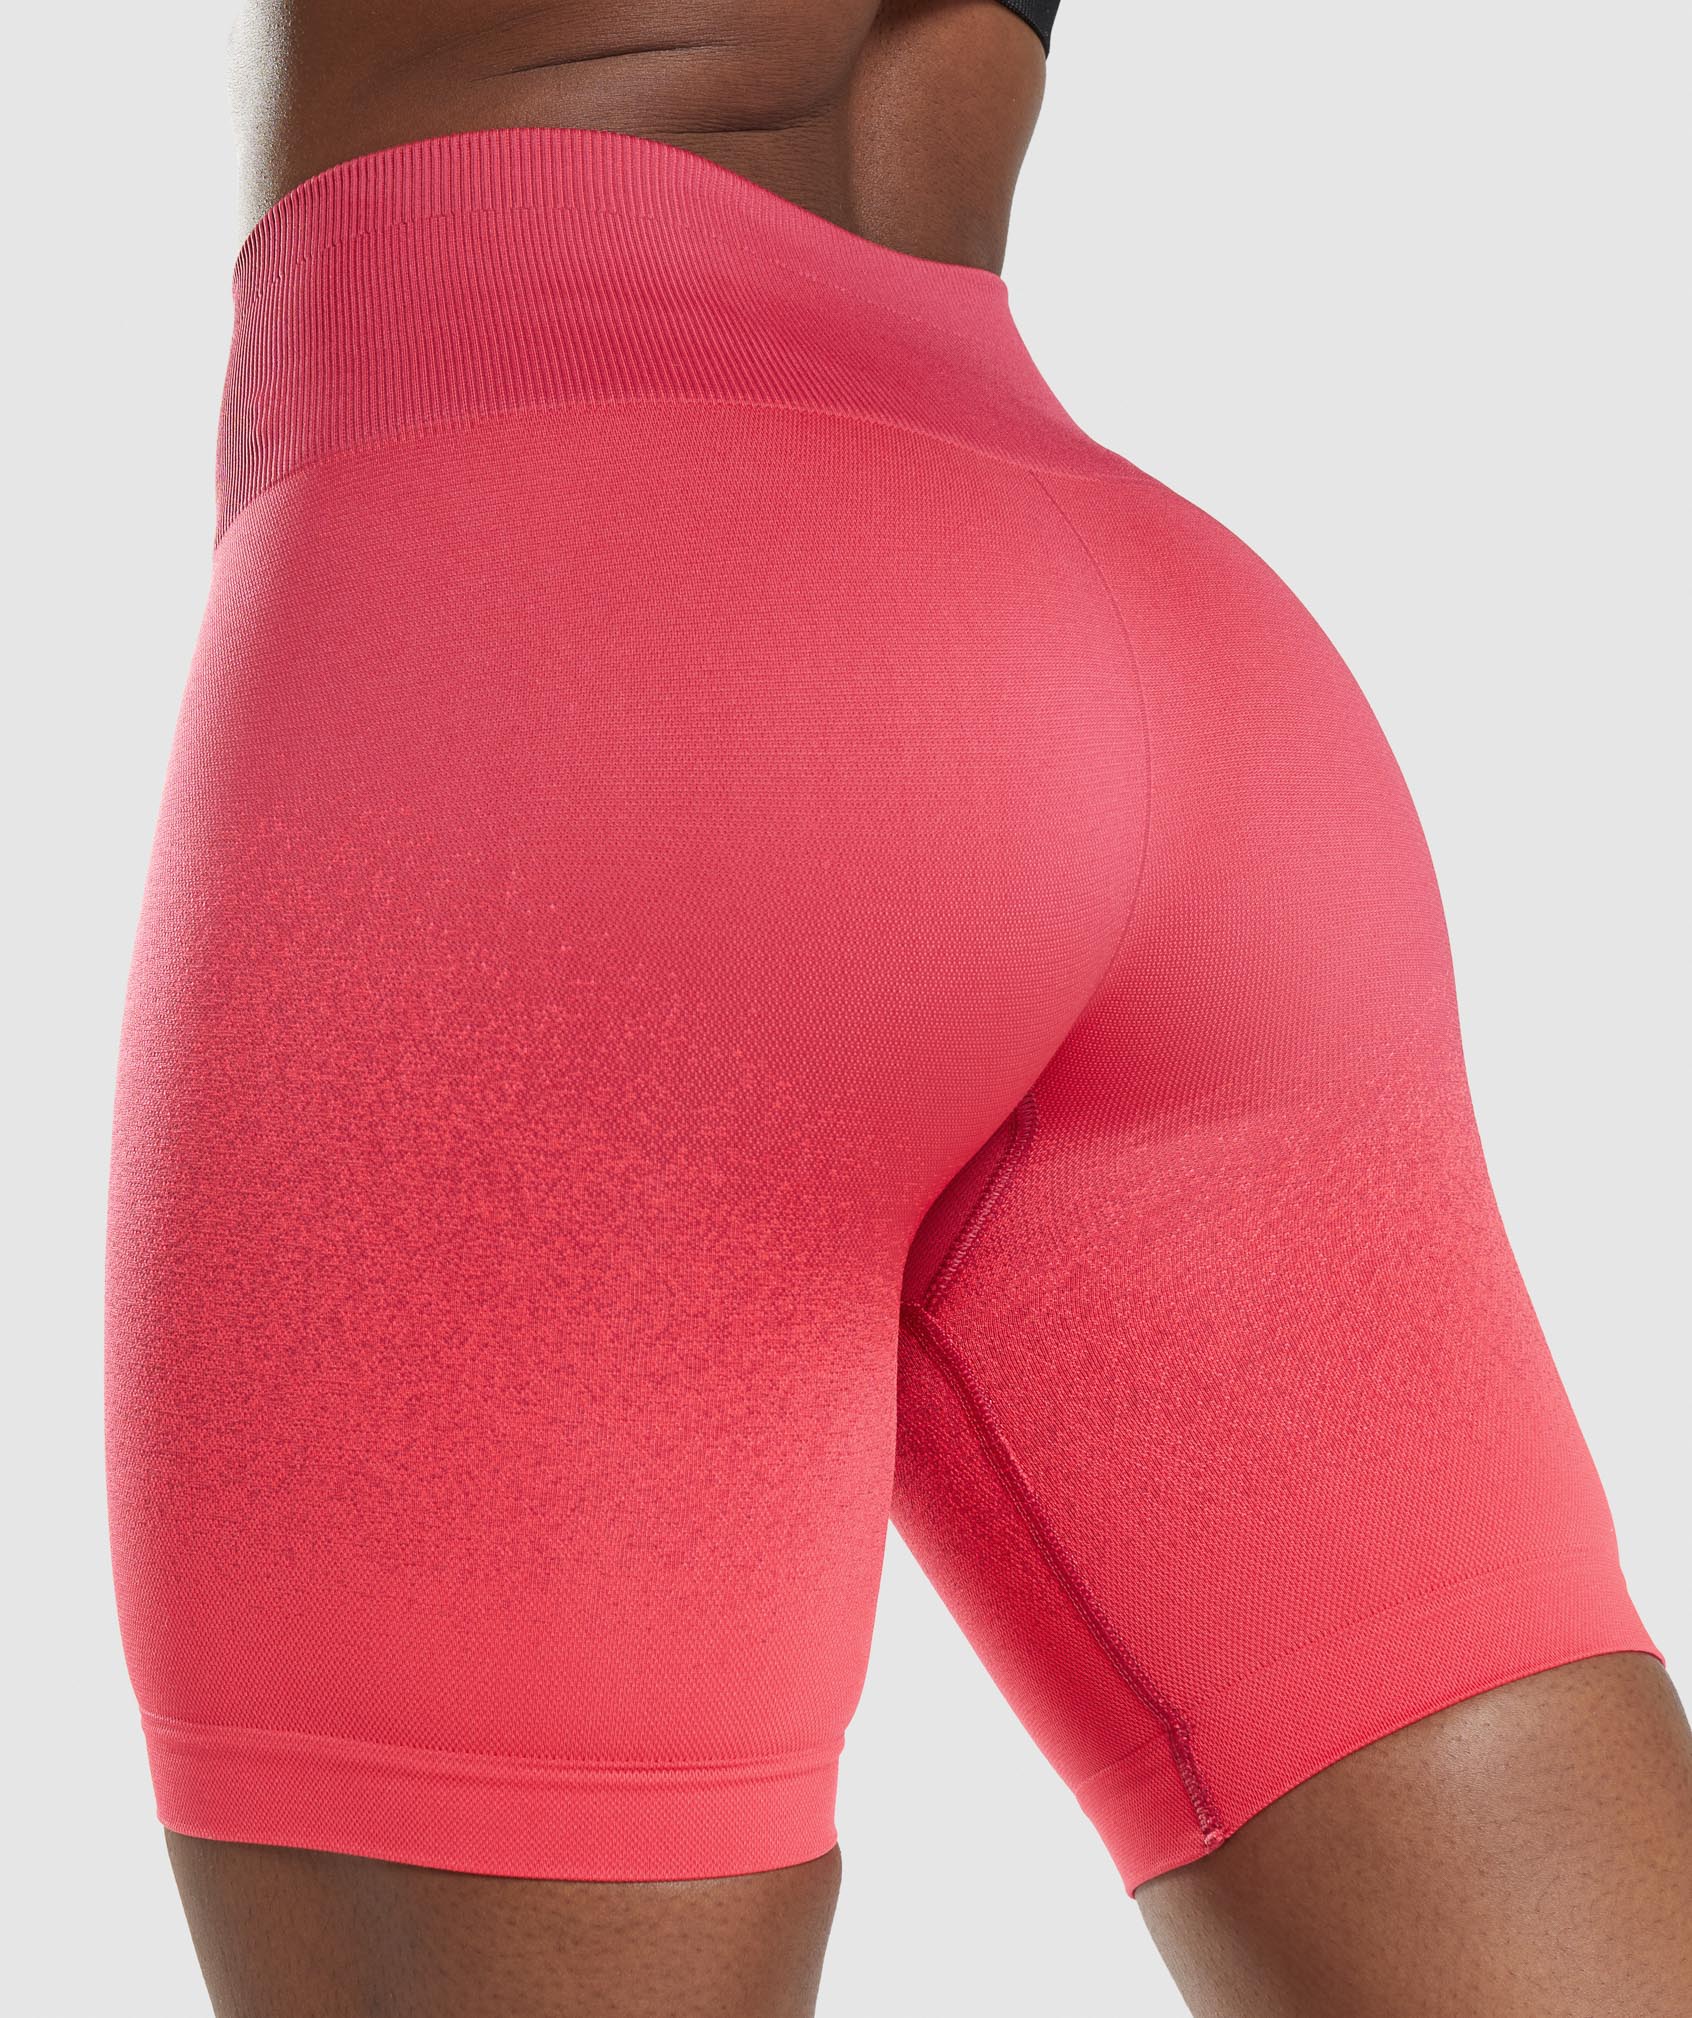 Gymshark Adapt Ombre Seamless Cycling Shorts - Pink/Red